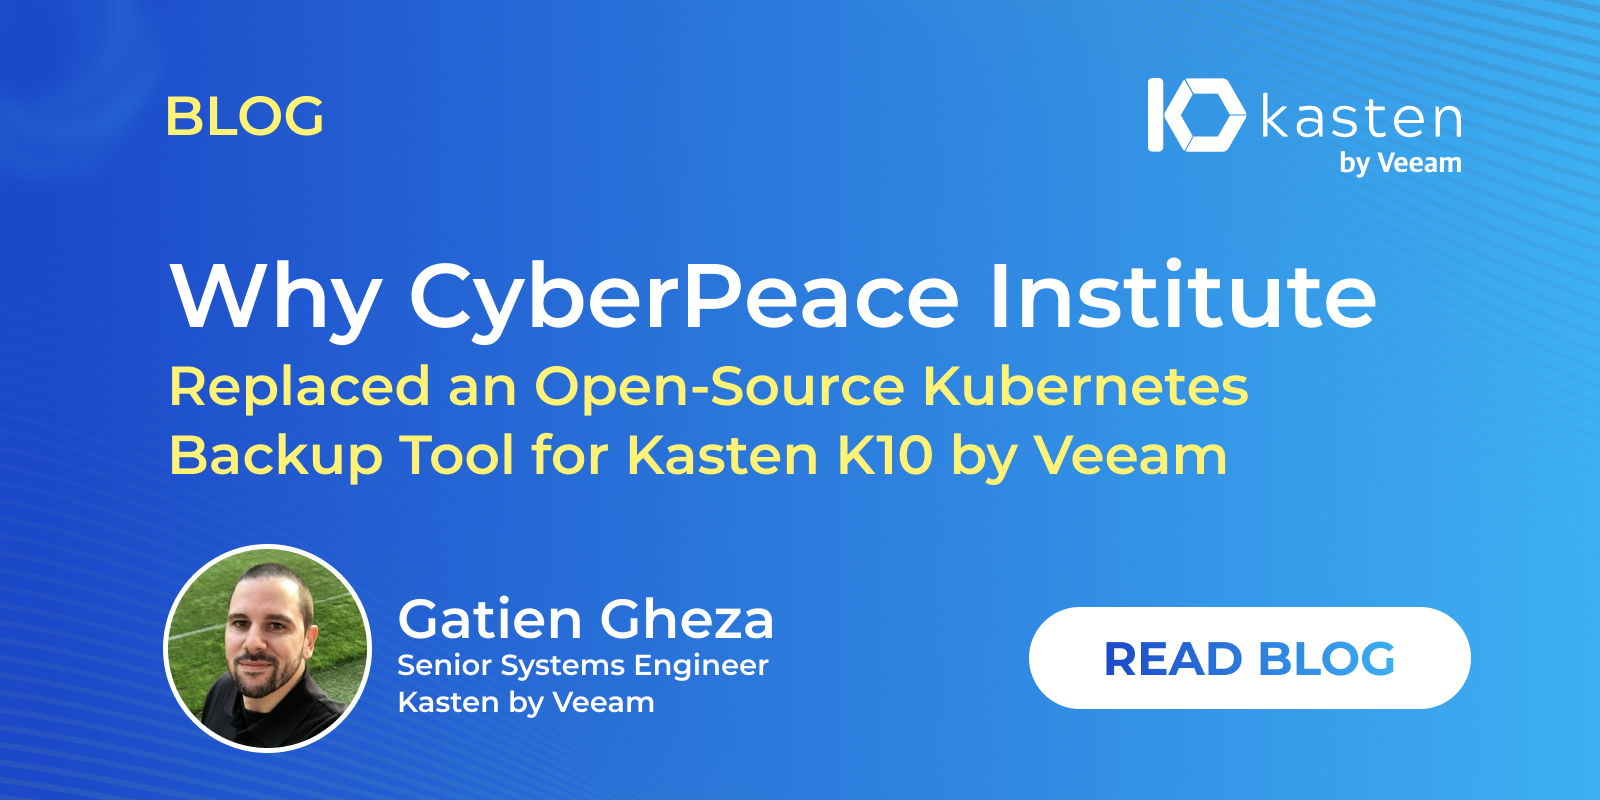 CyberPeace Institute Replaces Open Source Backup Tool for Kasten K10